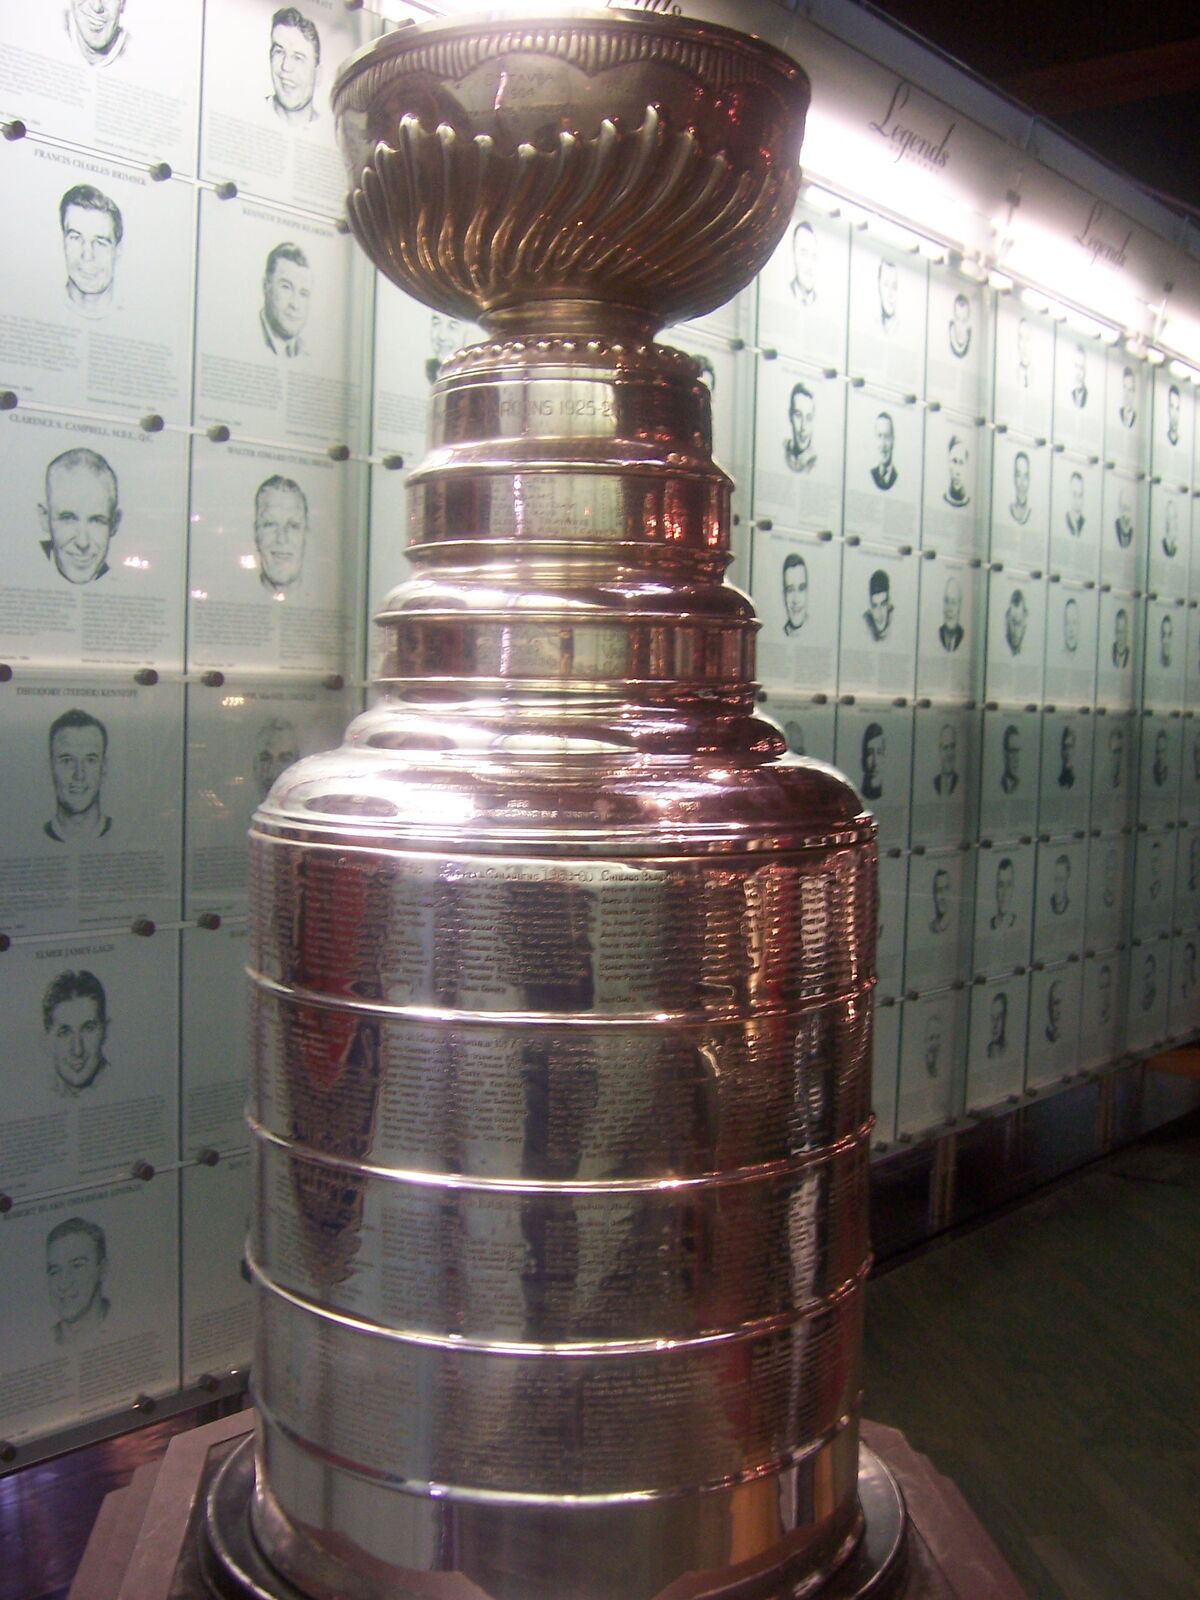 https://static.wikia.nocookie.net/icehockey/images/c/c8/Stanley_cup_closeup.jpg/revision/latest/scale-to-width-down/1200?cb=20080314172857